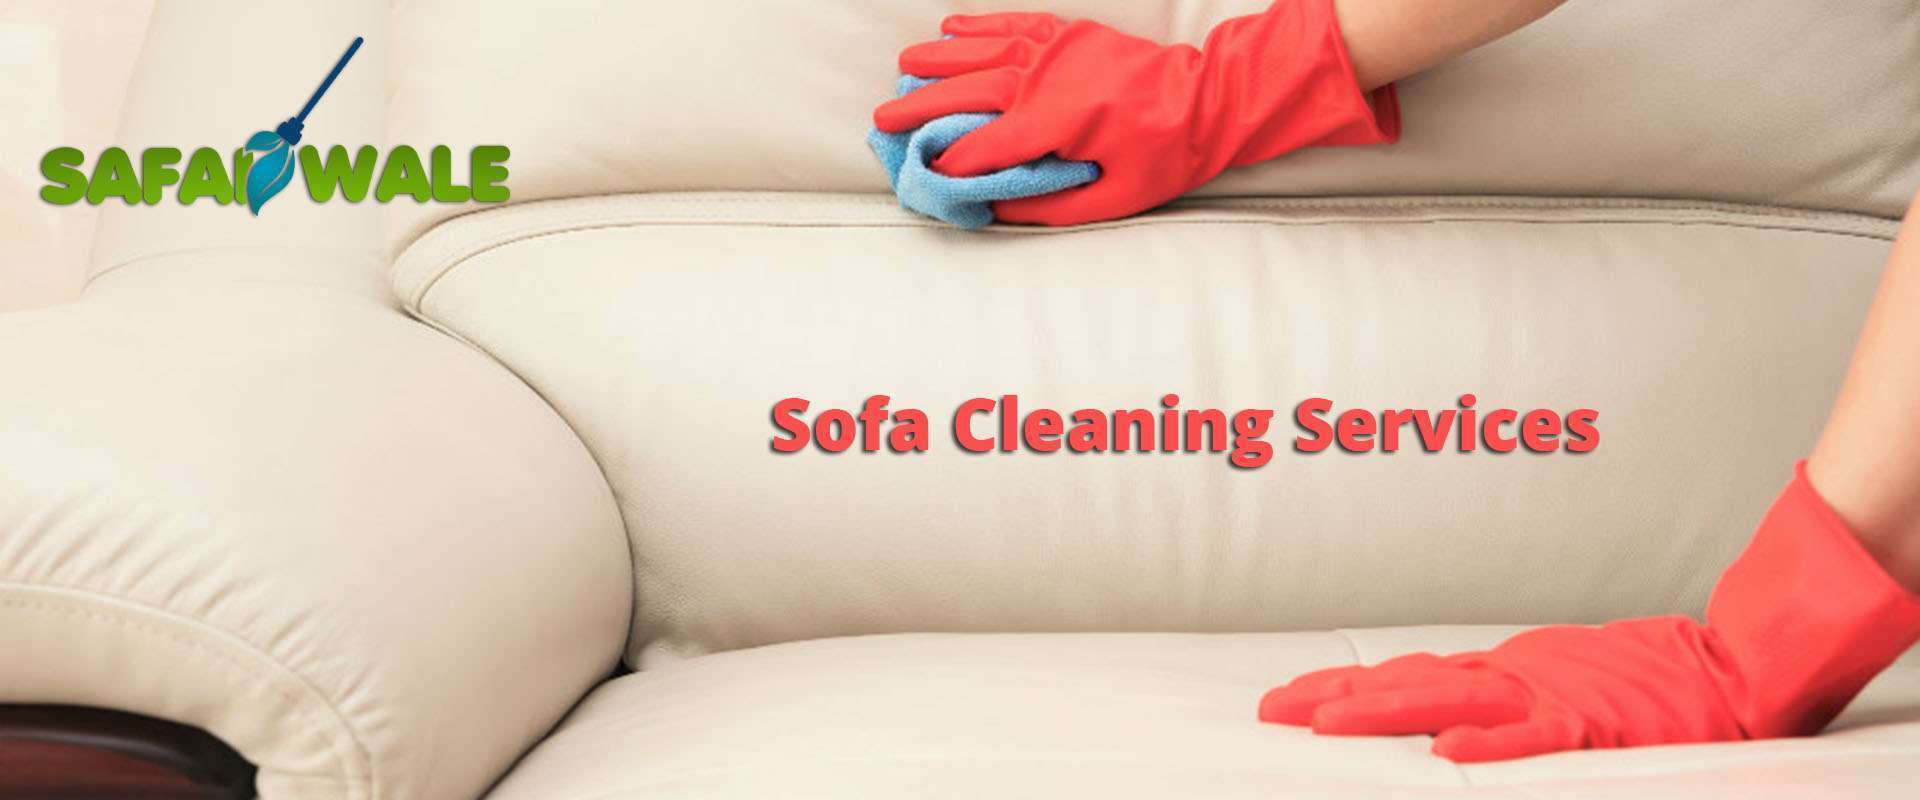 Best Affordable Sofa Cleaning Services In Noida - Safaiwale